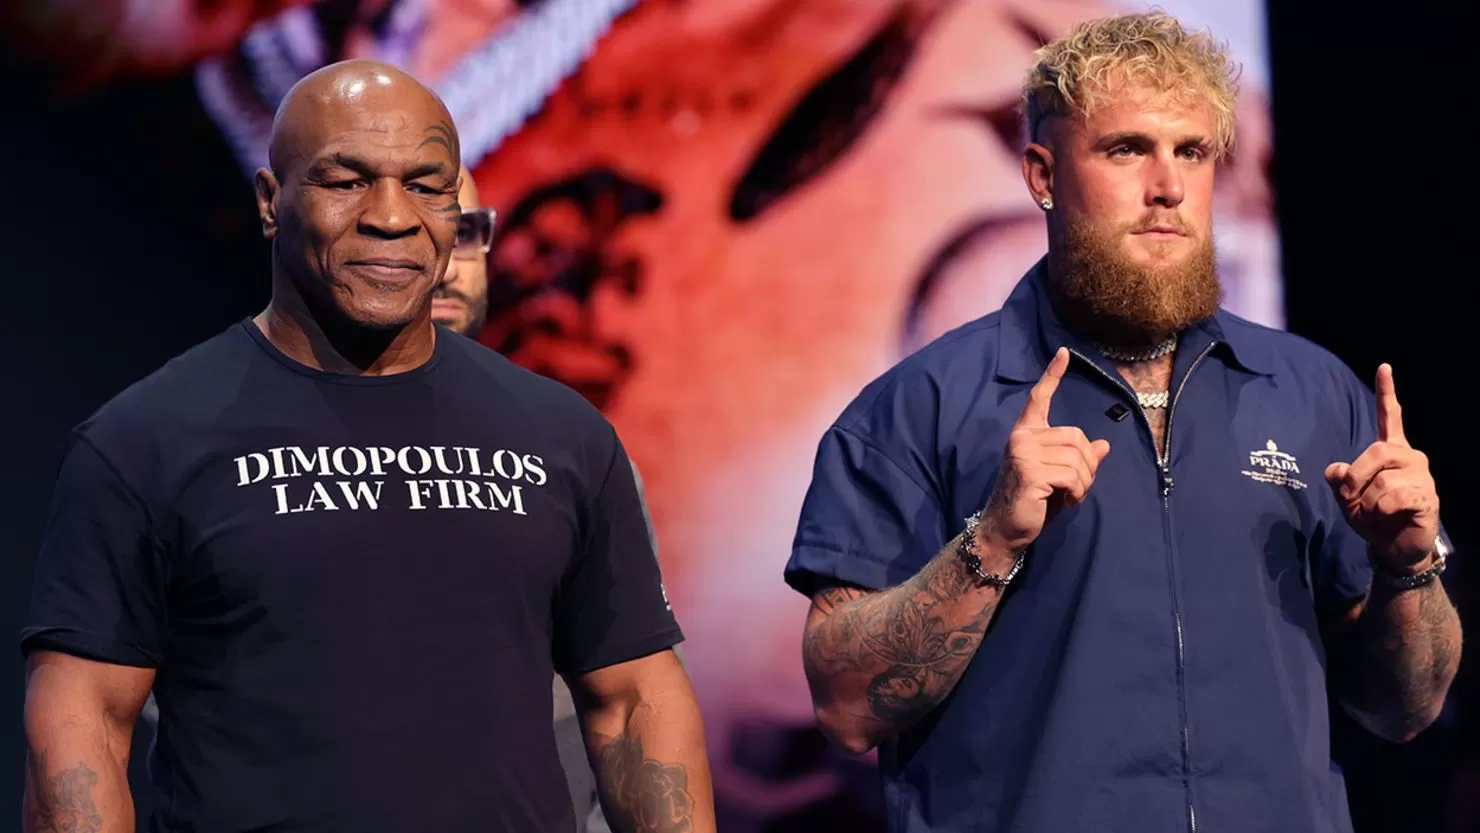 Mike Tyson vs. Jake Paul match delayed due to Tyson's medical issue | CNN